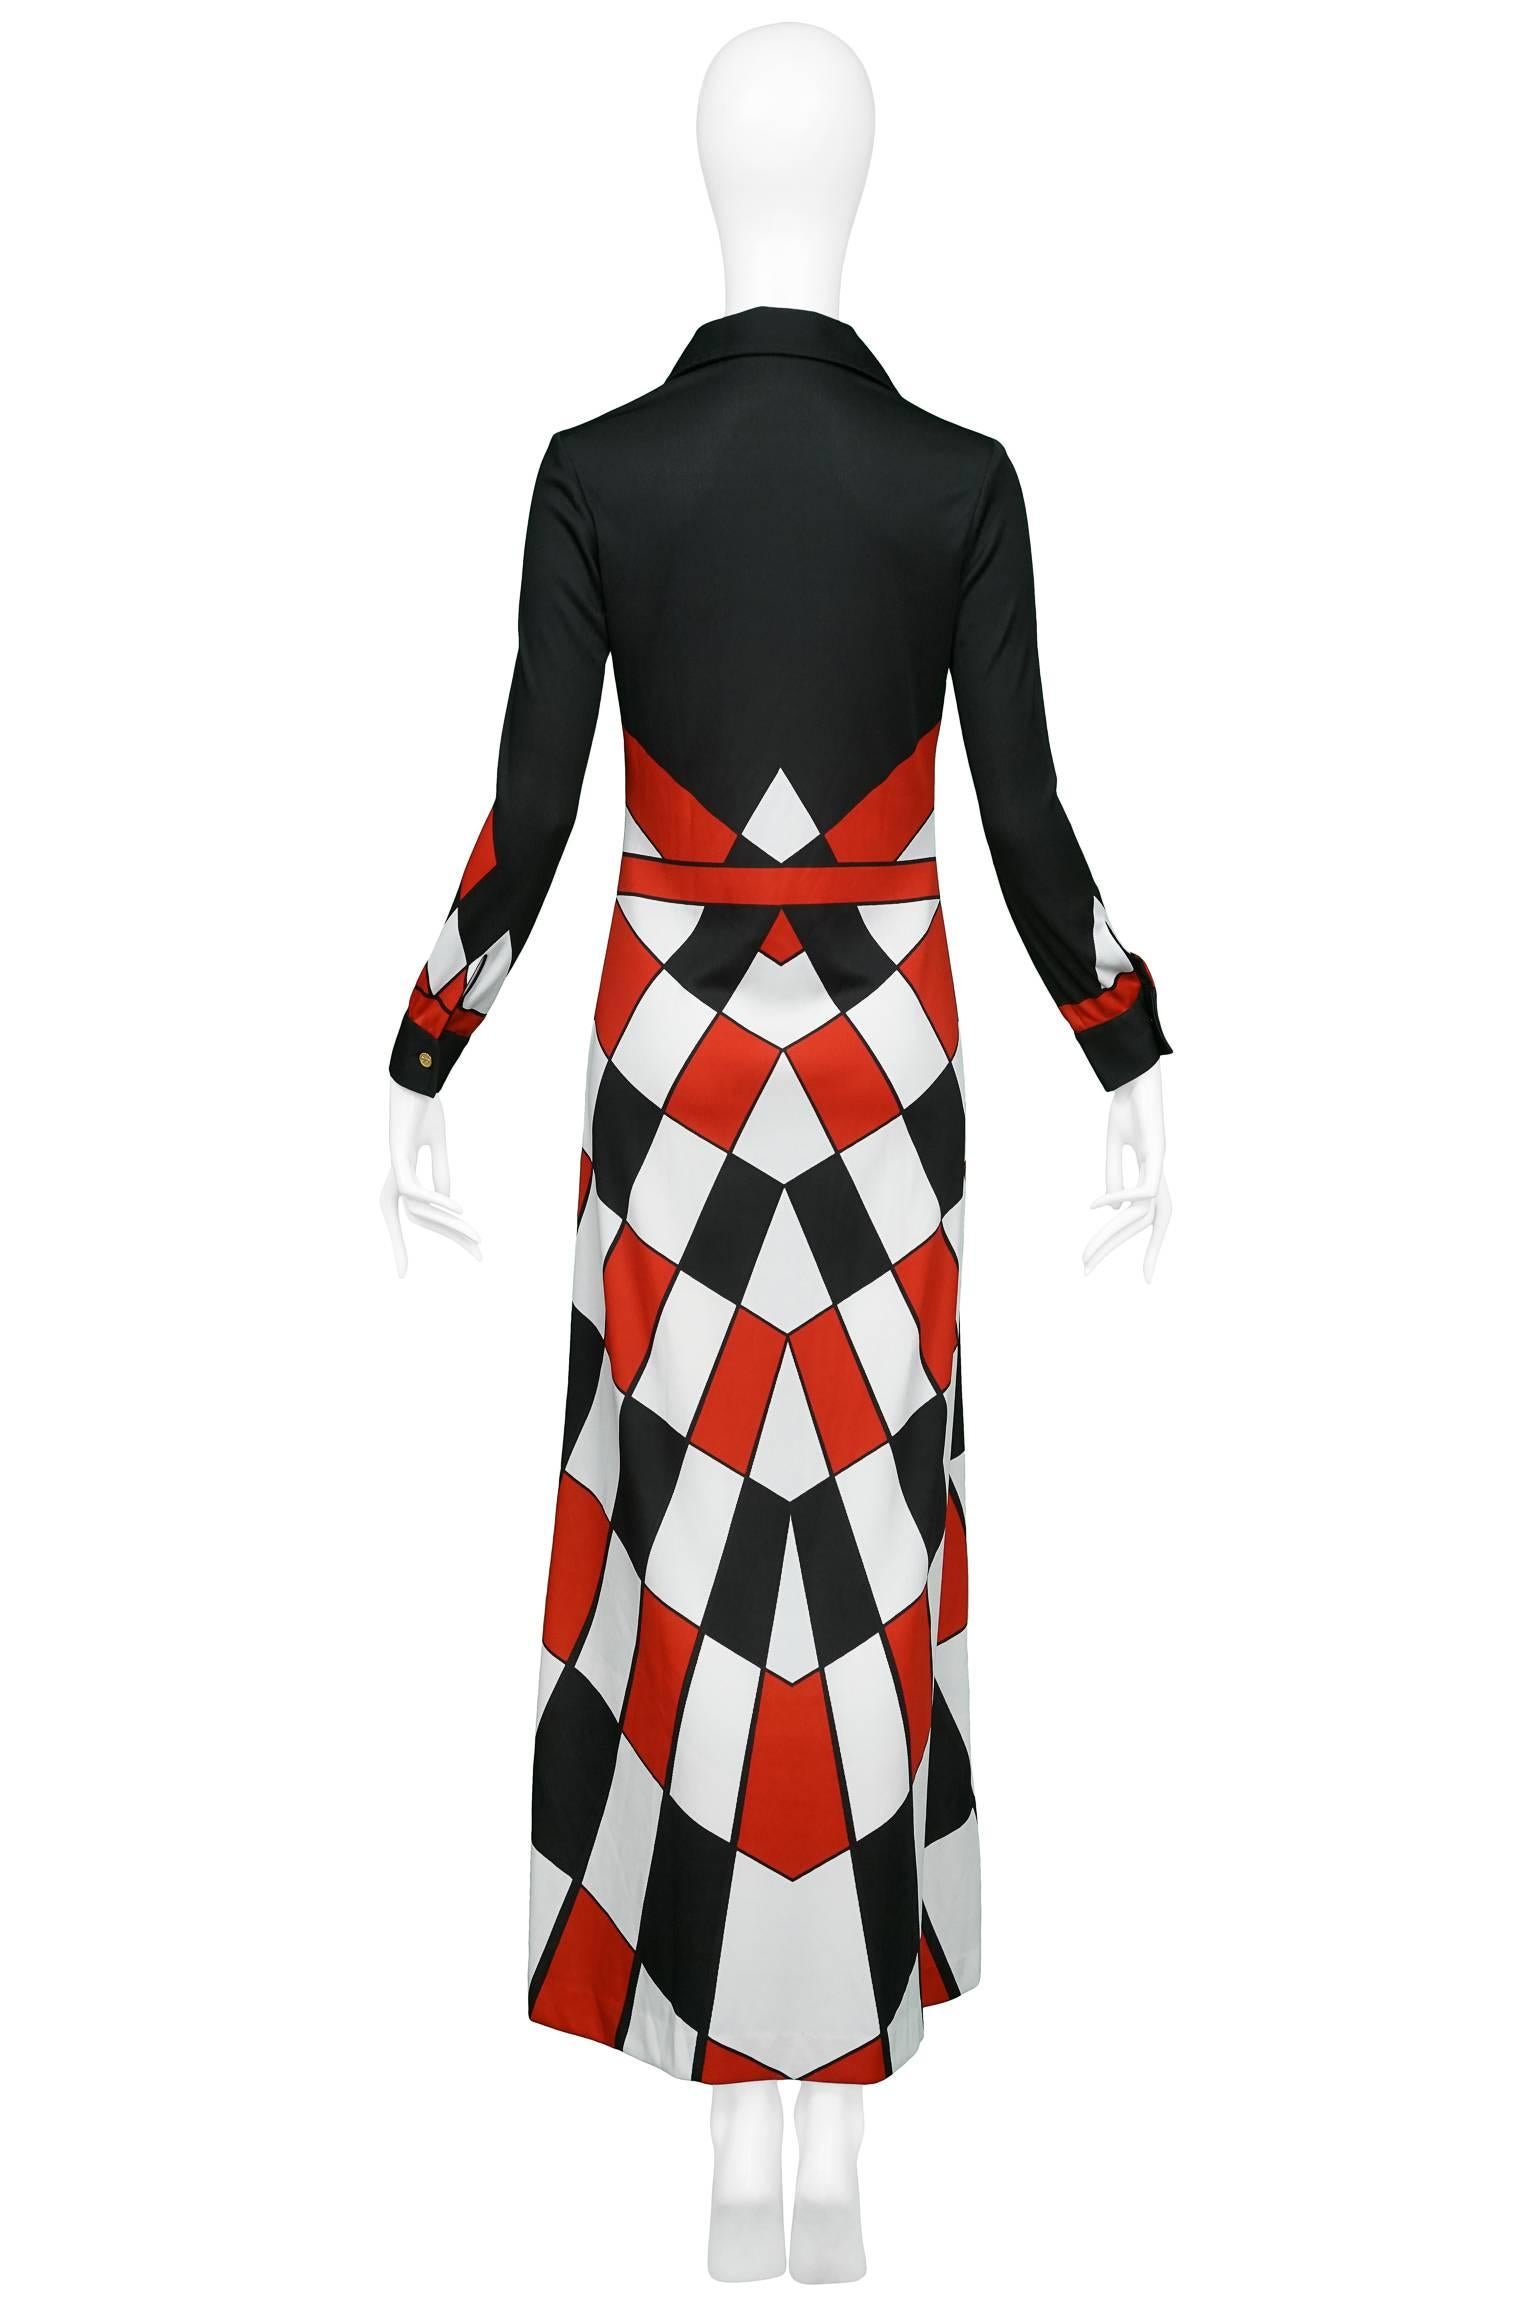 red black and white maxi dress